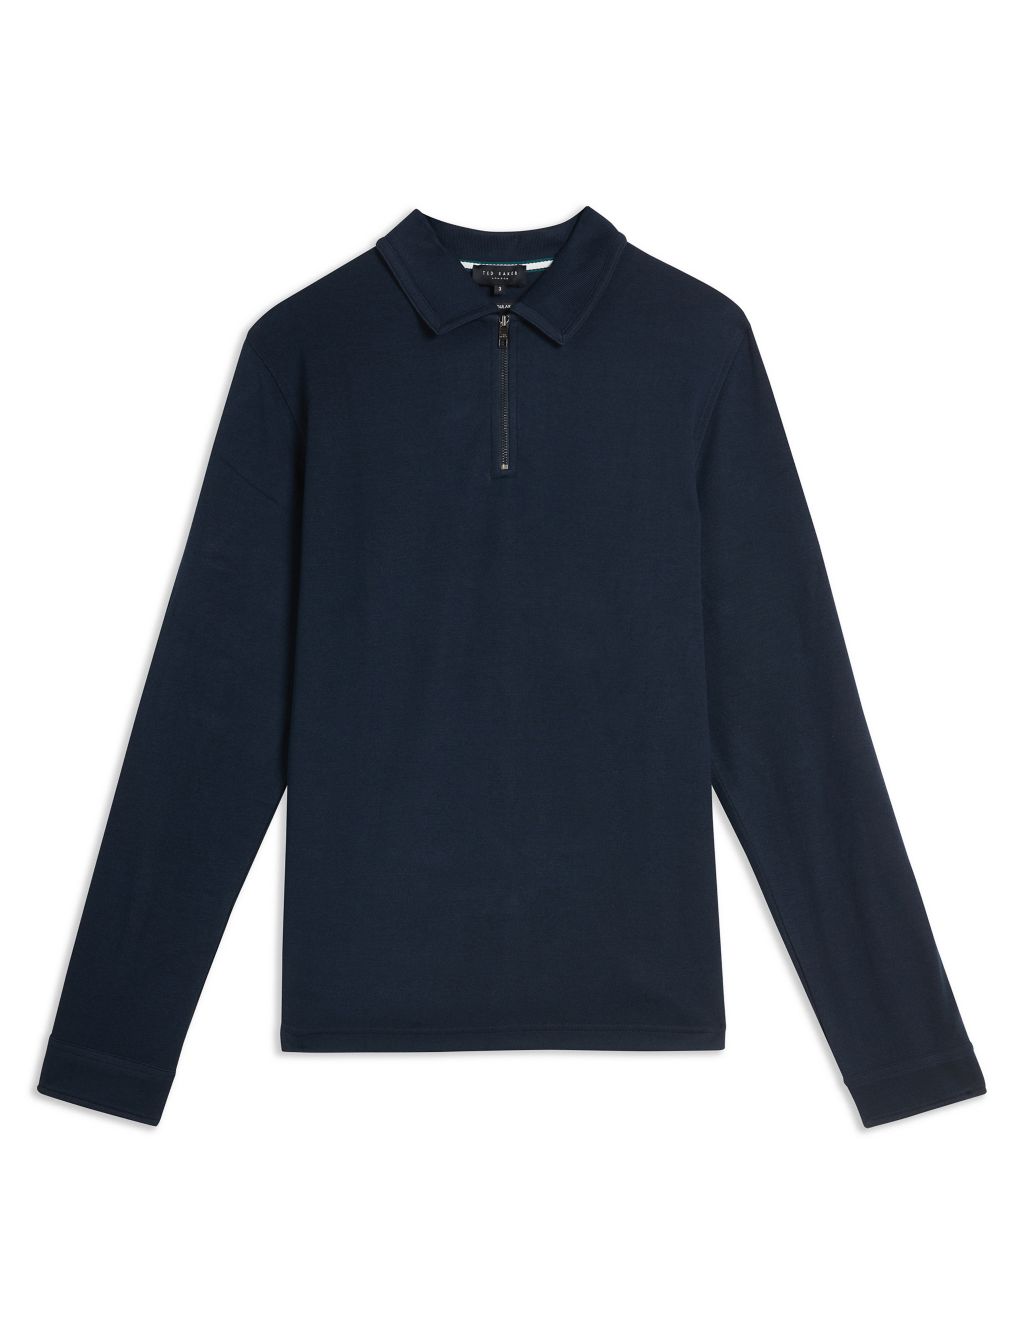 Zip Up Knitted Polo Shirt image 2